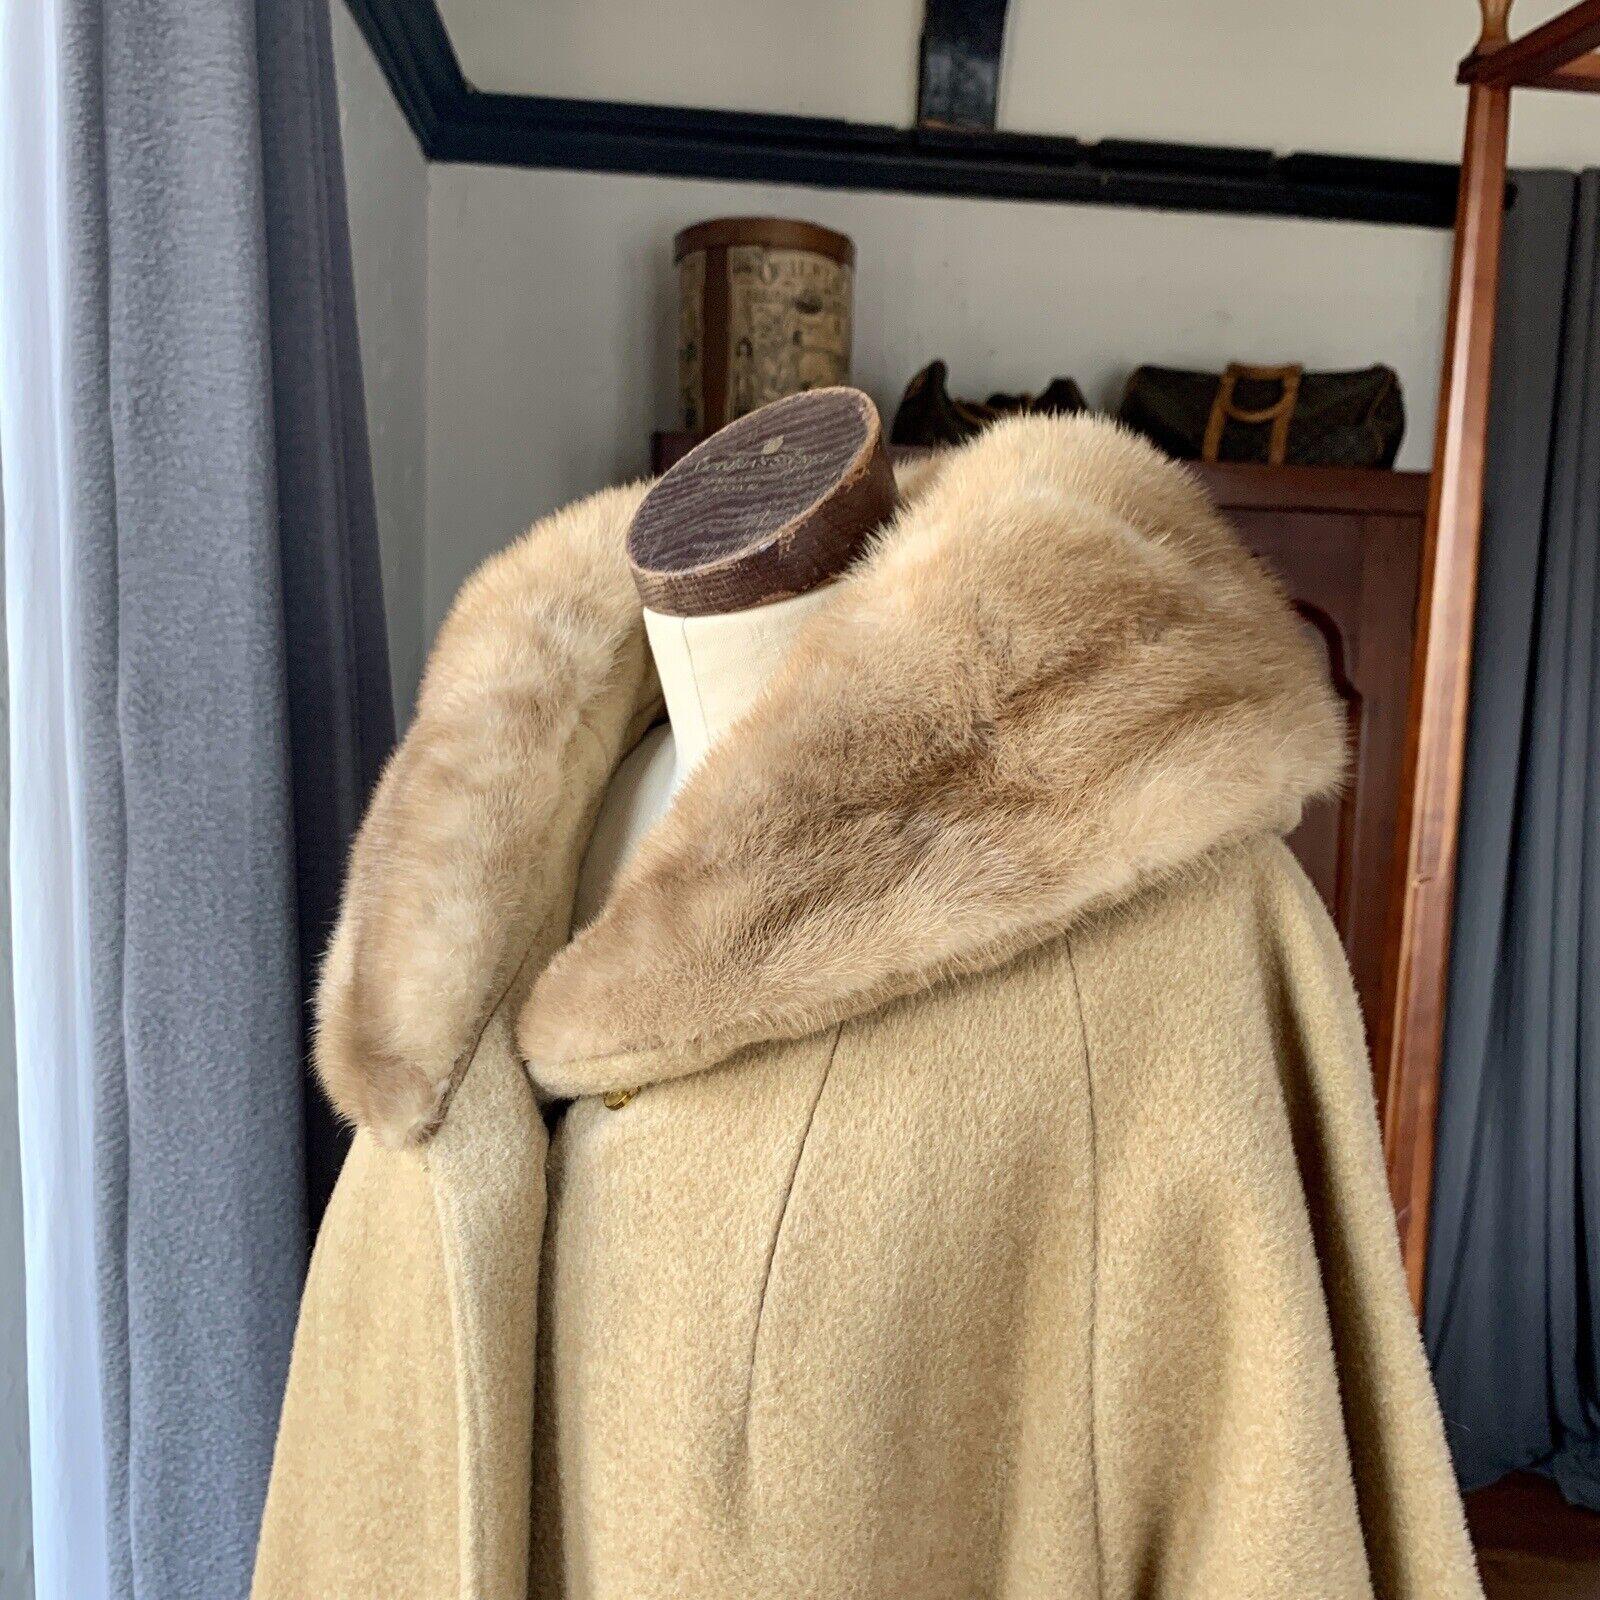 Lilli Ann, Tisse a Paris, One Button Hidden Top Closure, Pink Satin Lining, Two Satin Lined Pockets, Mink Fur Collar, Heavy Weight, 3/4 Sleeve, Beautiful Coat

Measurements Laying Flat

Bust up to 26